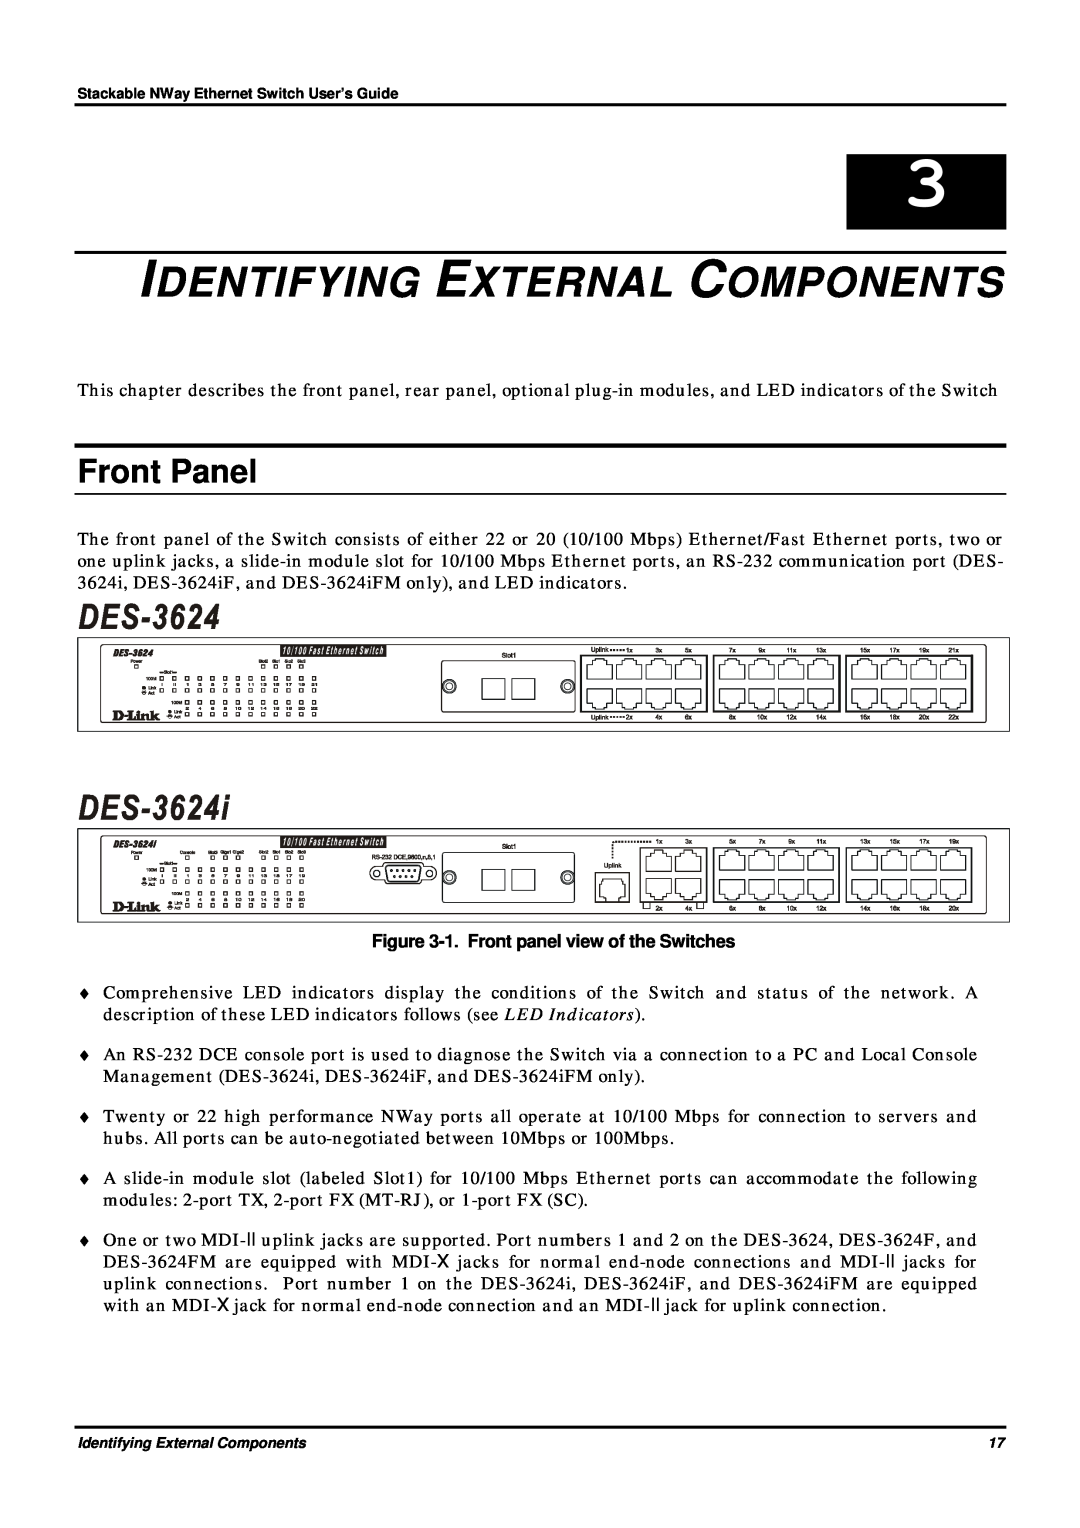 D-Link DES-3624 manual Identifying External Components, Front Panel, 1. Front panel view of the Switches 